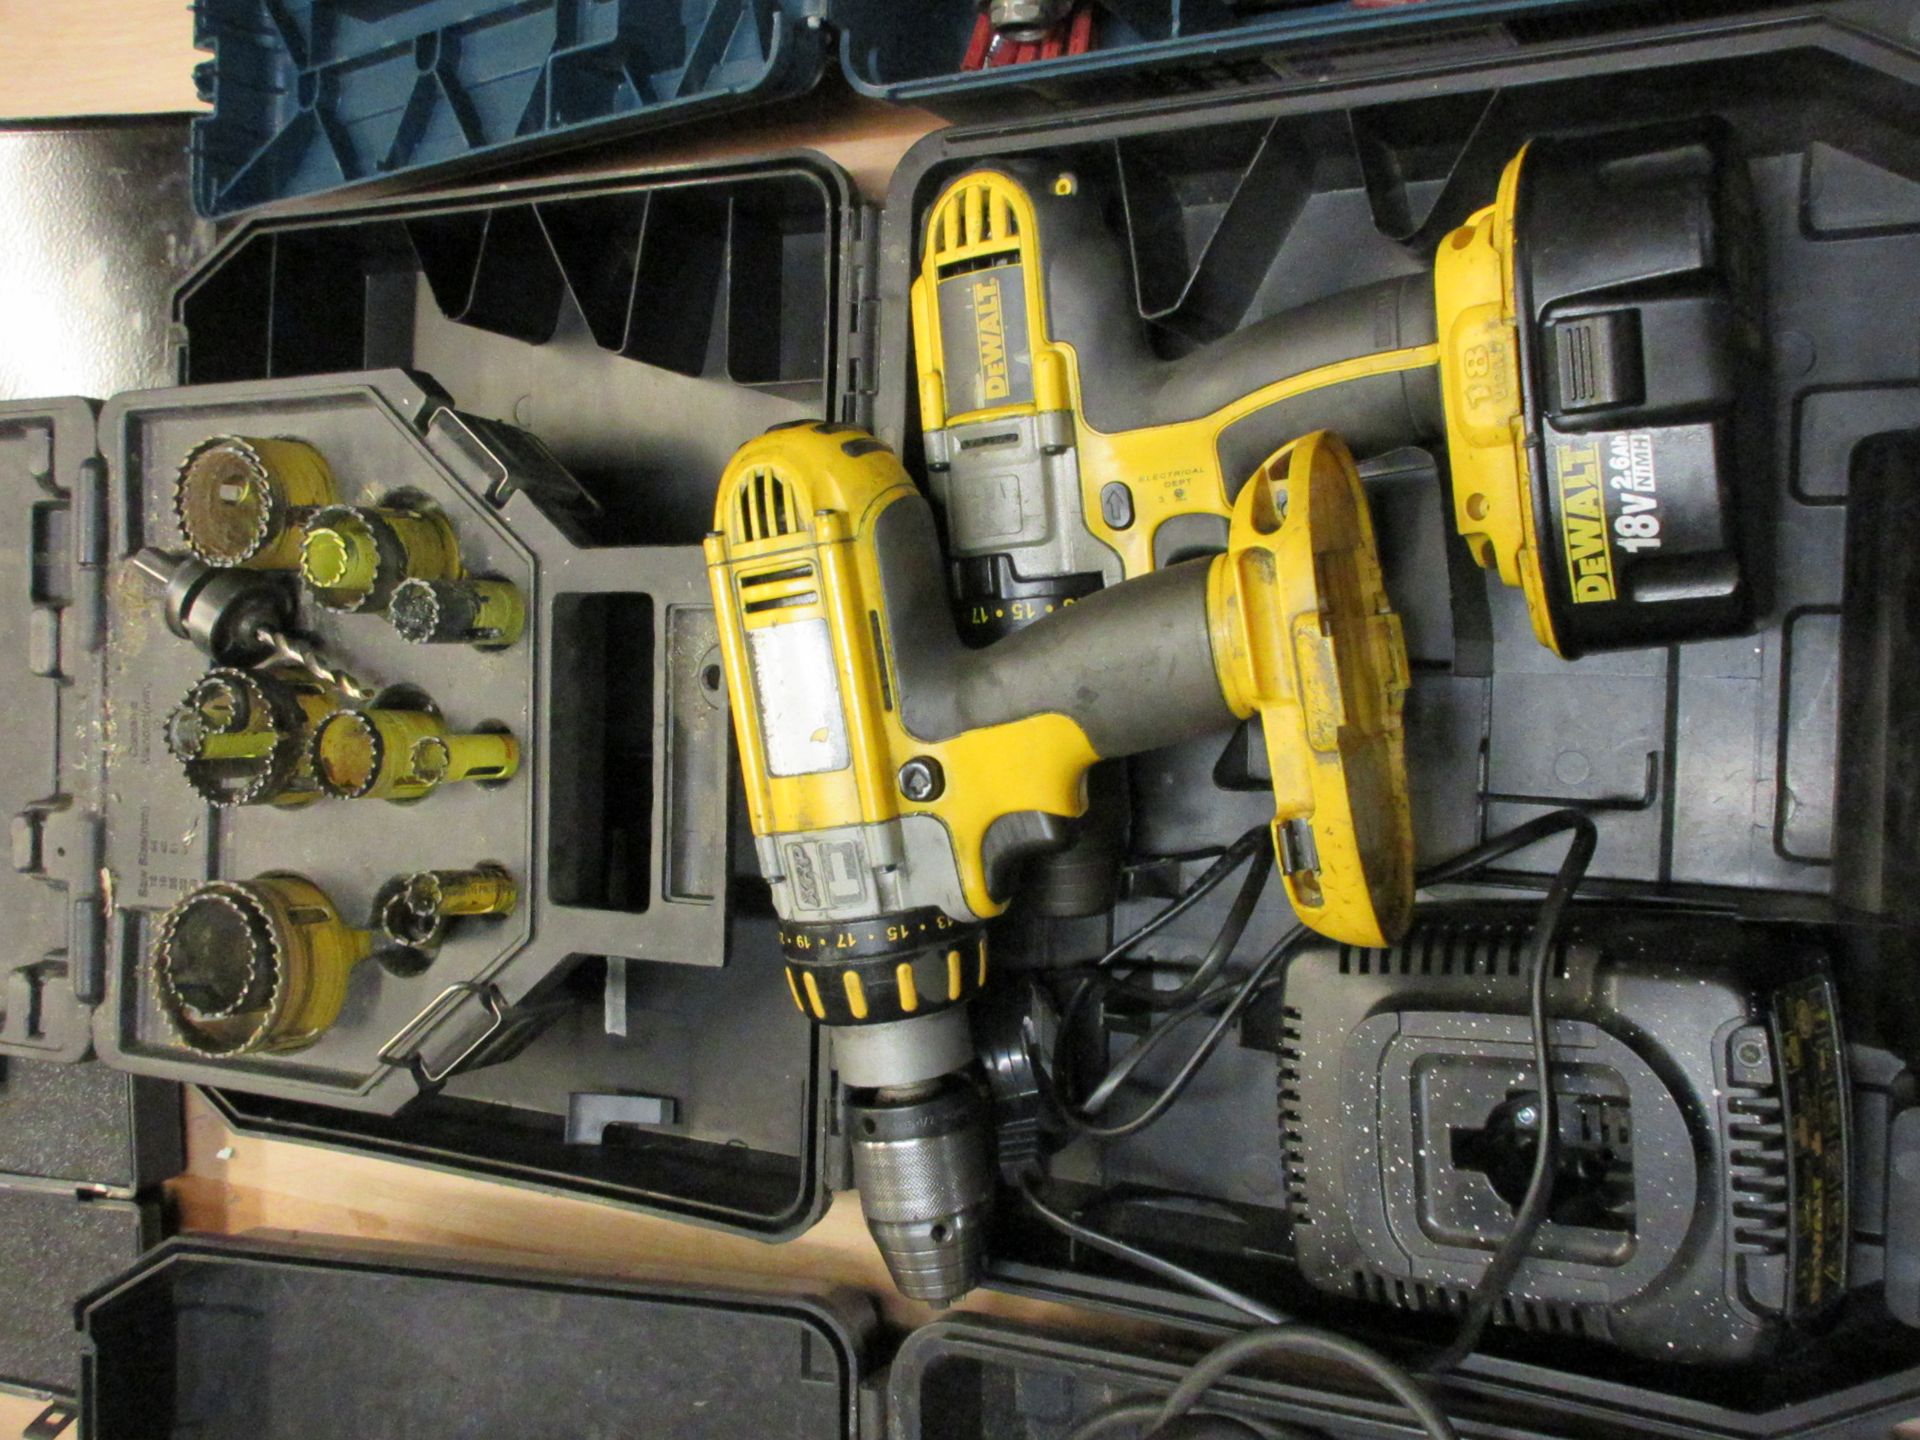 Two assorted Dewalt cordless combi drills, 18v, one charger, one battery and Dewalt hole saw set